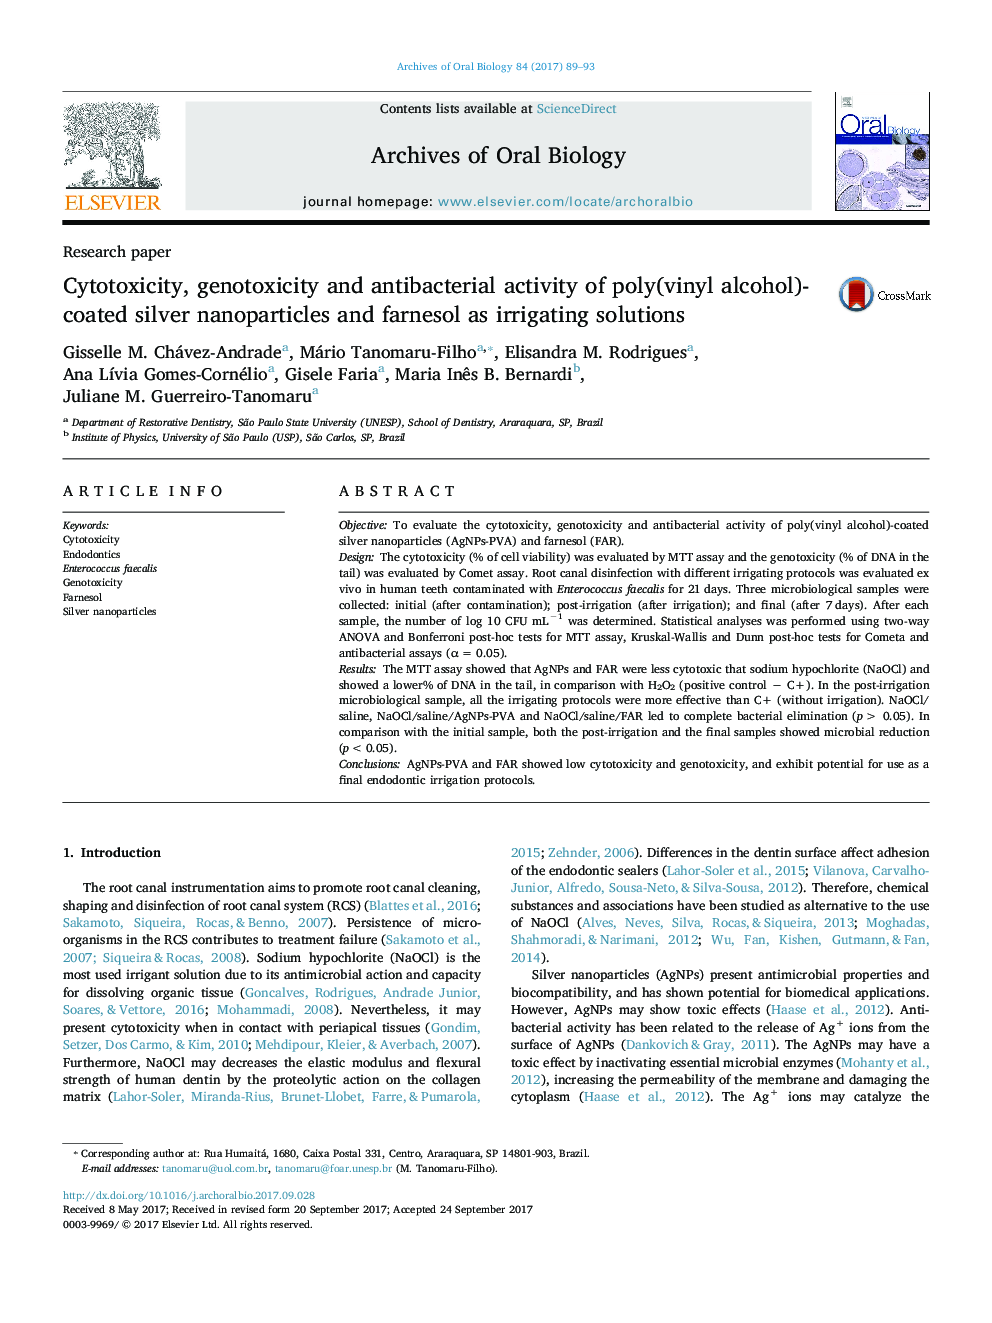 Cytotoxicity, genotoxicity and antibacterial activity of poly(vinyl alcohol)-coated silver nanoparticles and farnesol as irrigating solutions